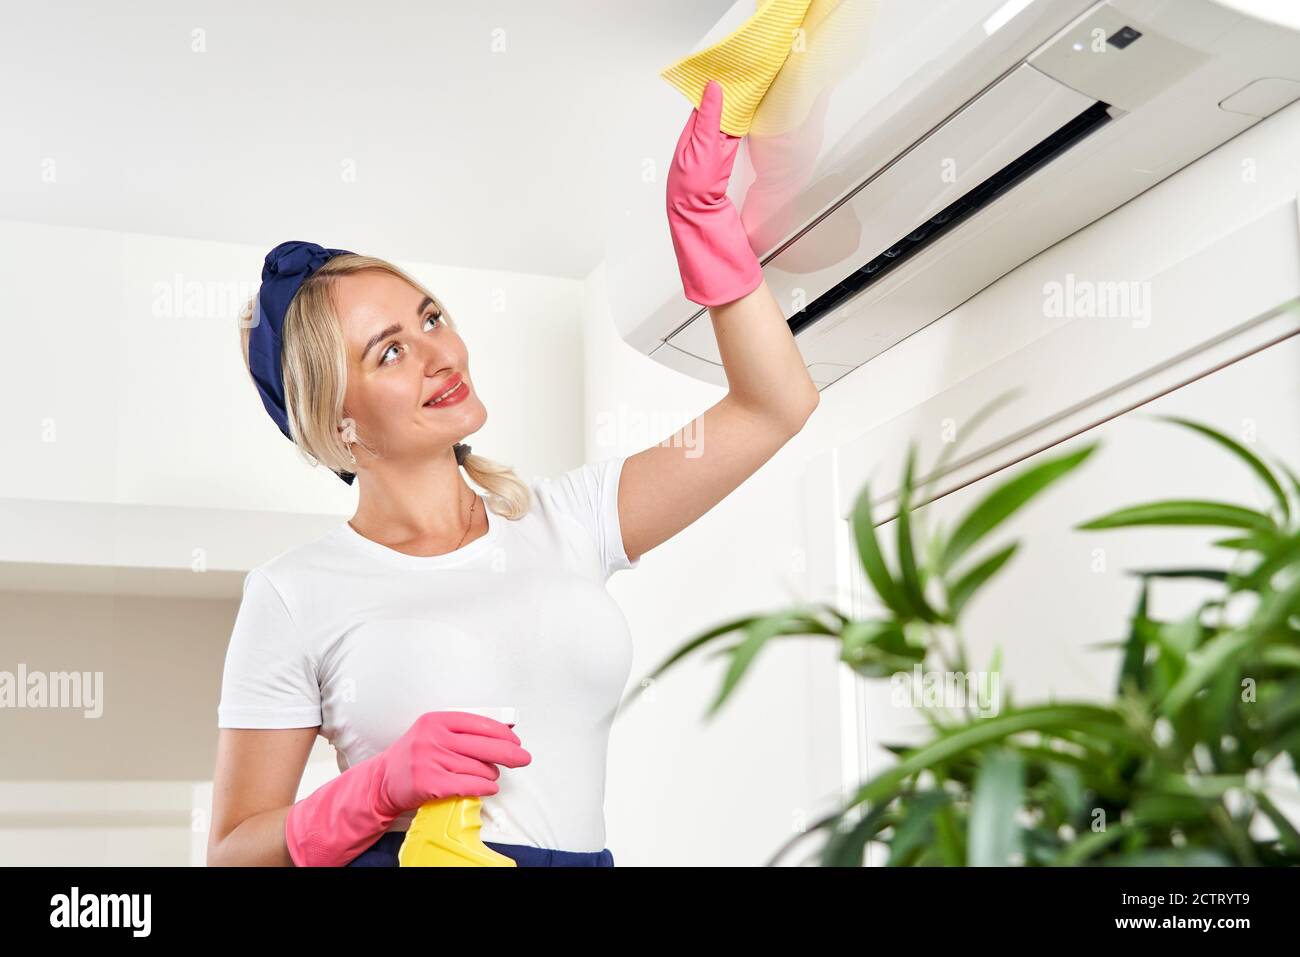 Woman cleaning air conditioner with rag. Cleaning service or housewife concept Stock Photo